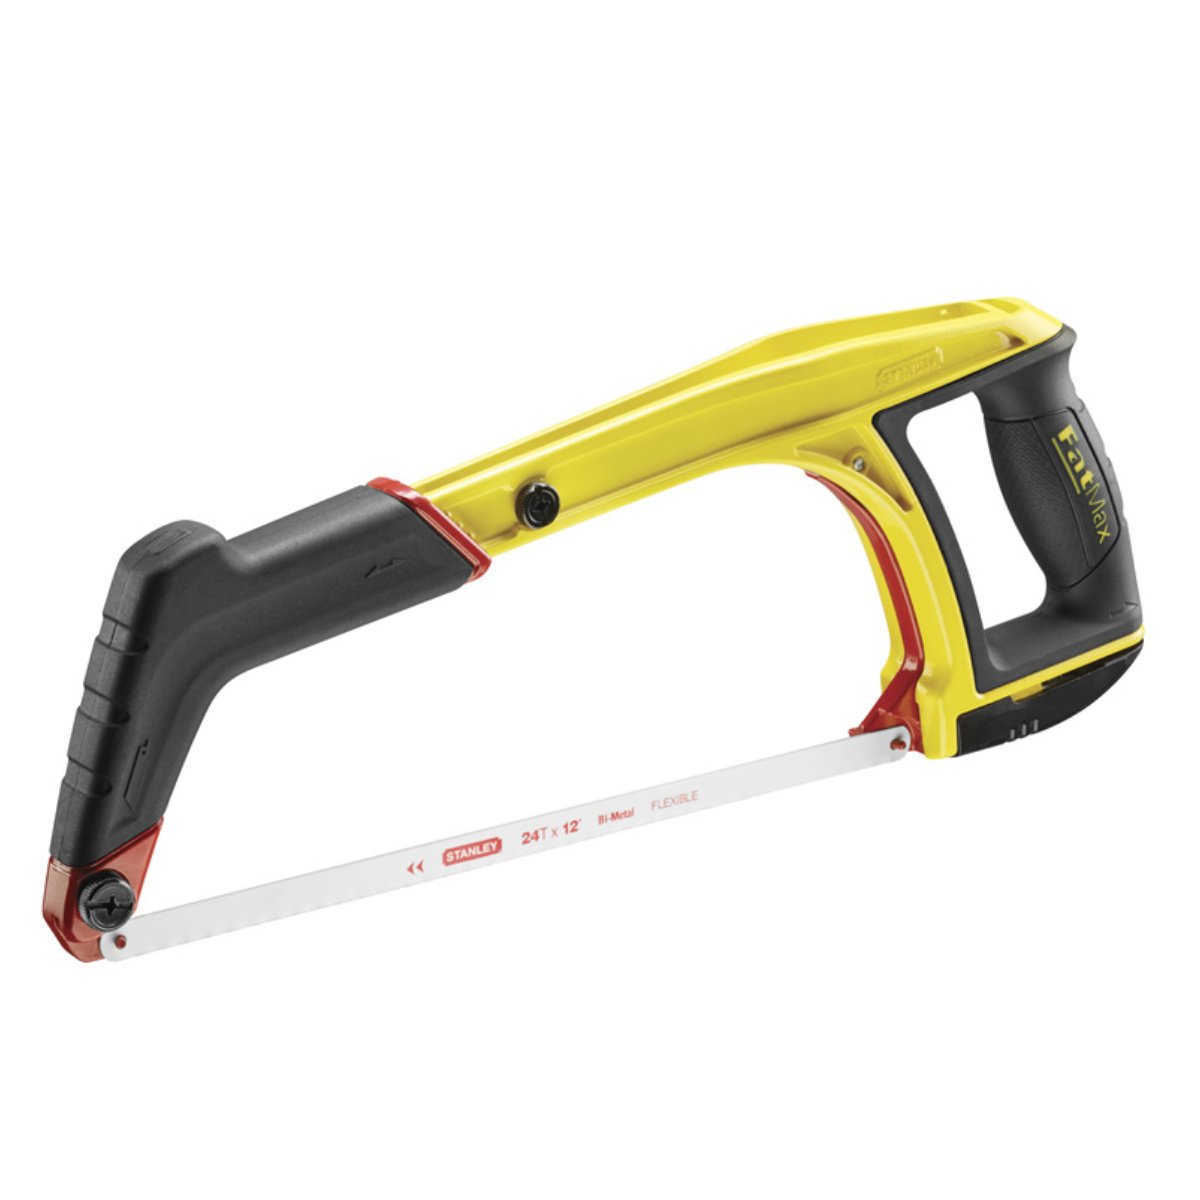 Stanley FatMax 5in1 Hacksaw 300mm | 0-20-108 Power Tool Services